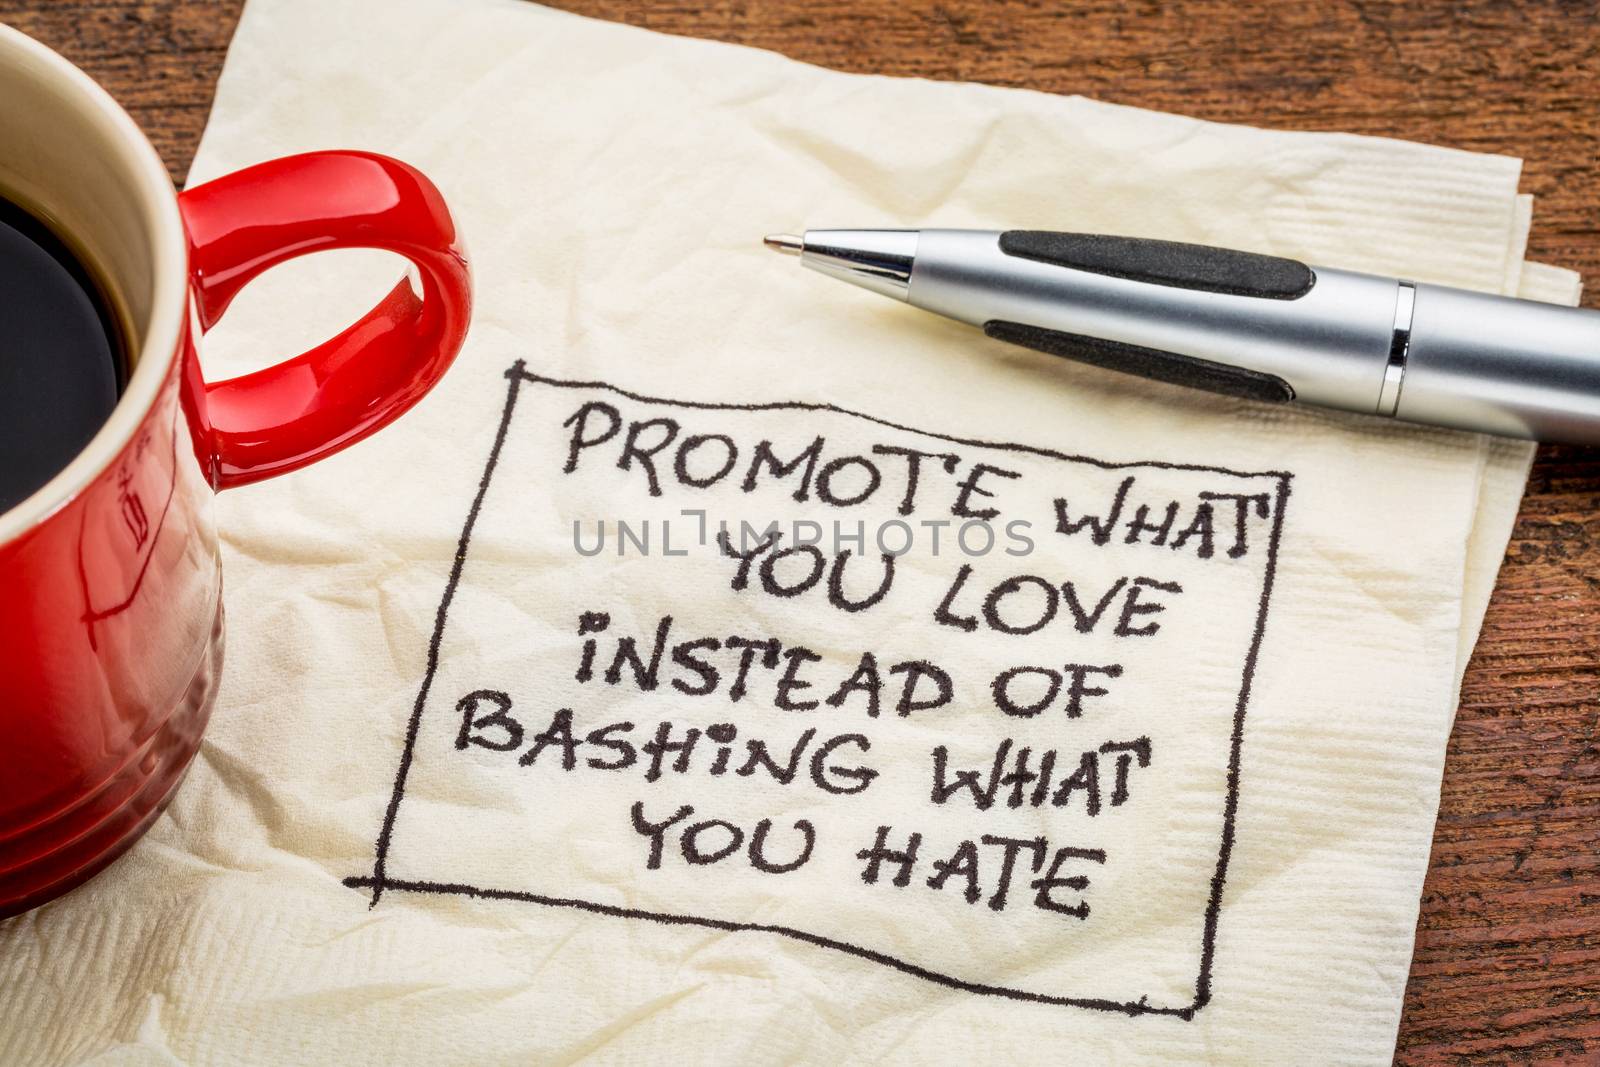 Promote what you love instead of bashing what you hate - handwriting on a napkin with cup of coffee